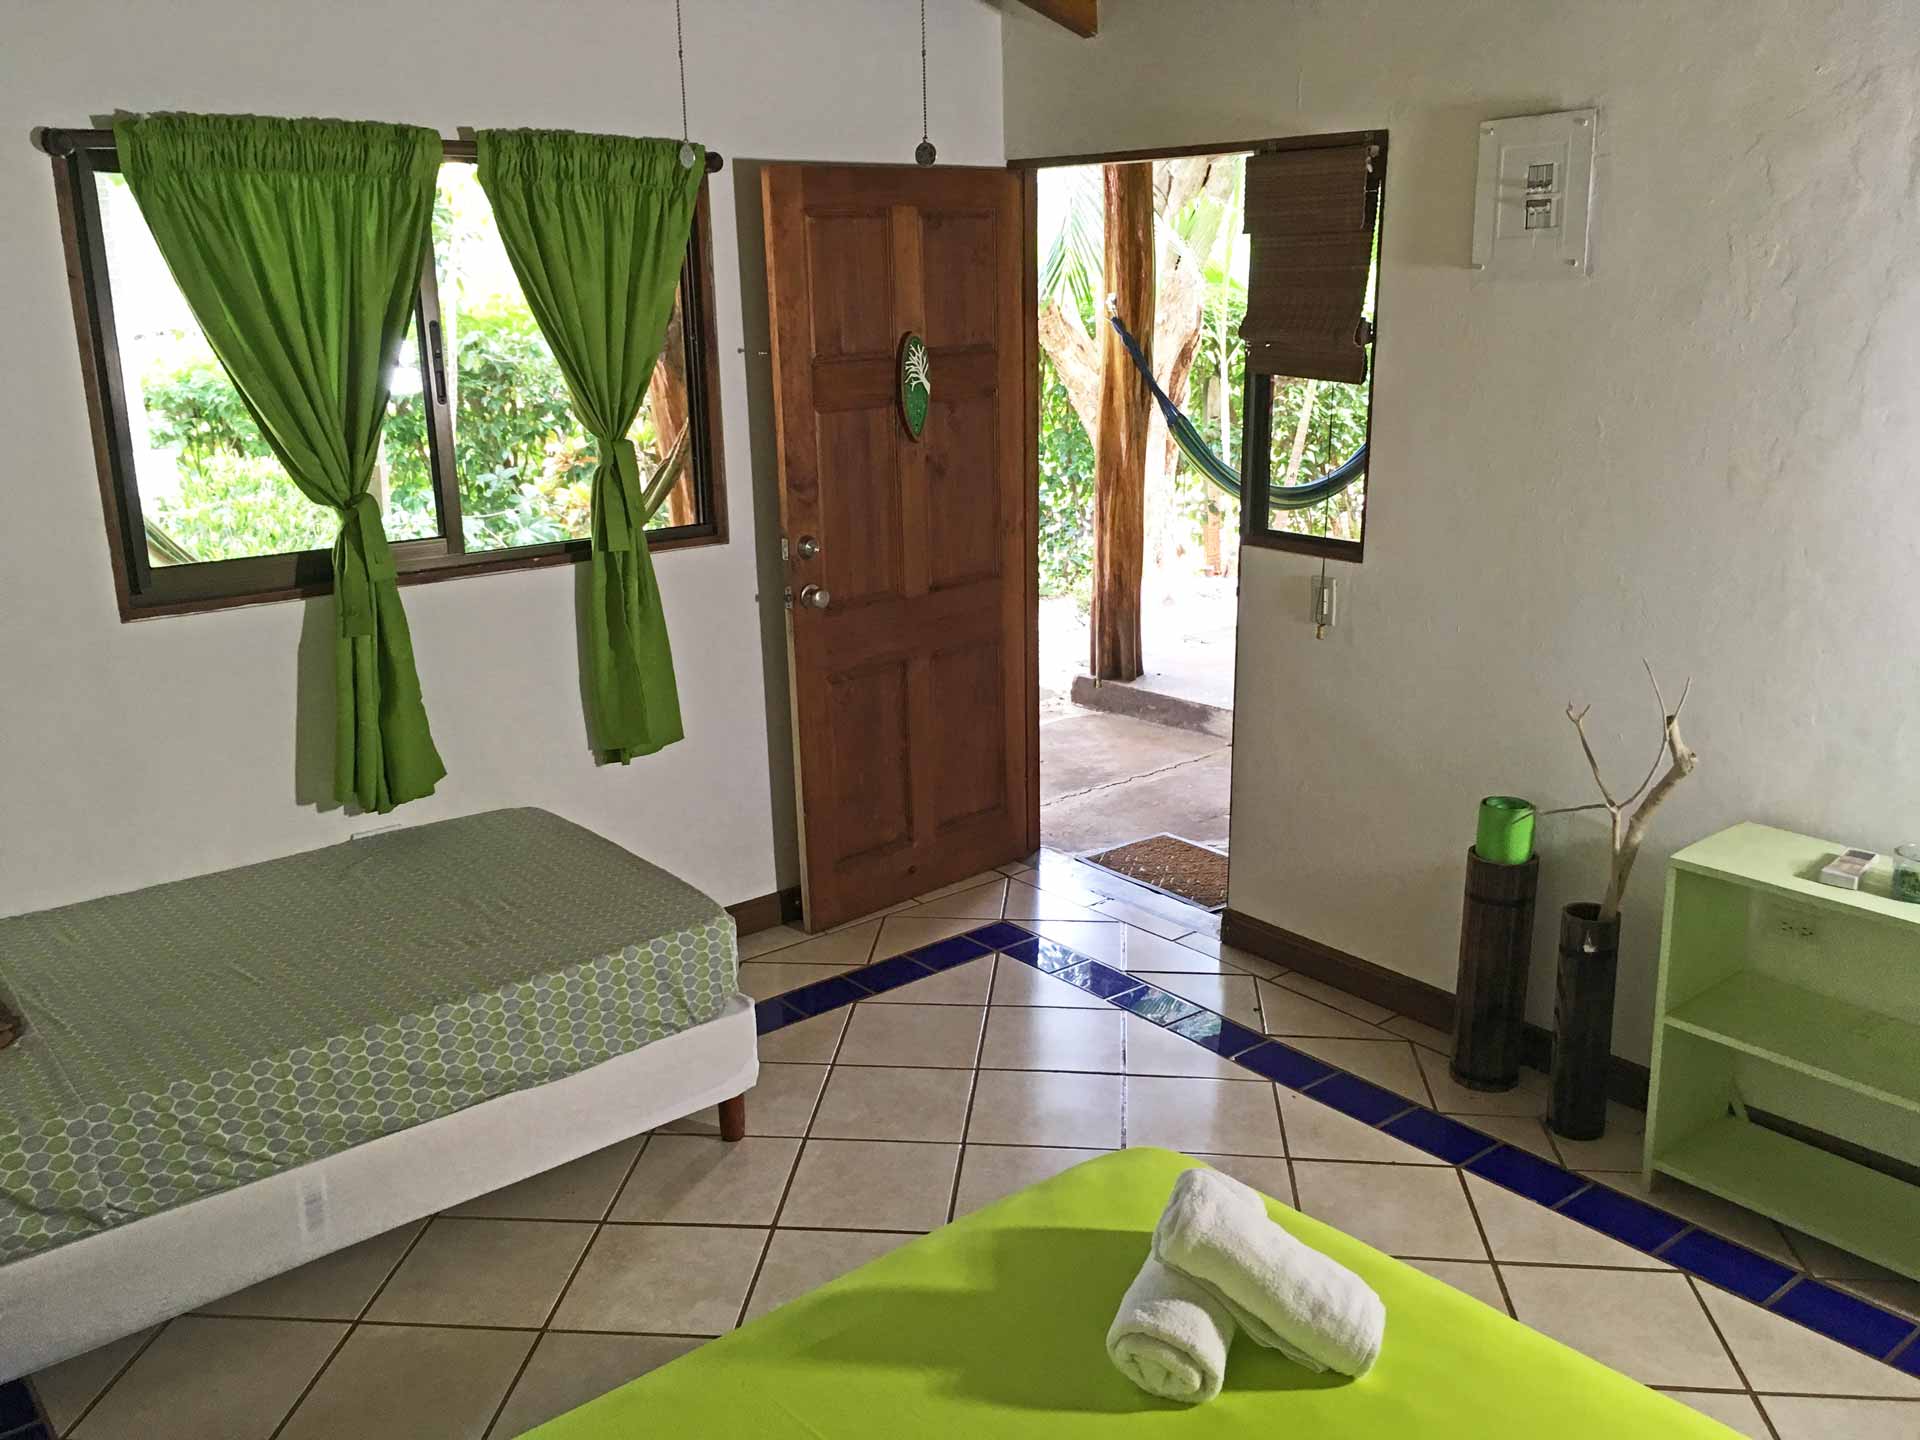 View from one bed in a triple room at Indra Inn, showing the window, door, hammock outside, yoga mat, and bookshelf